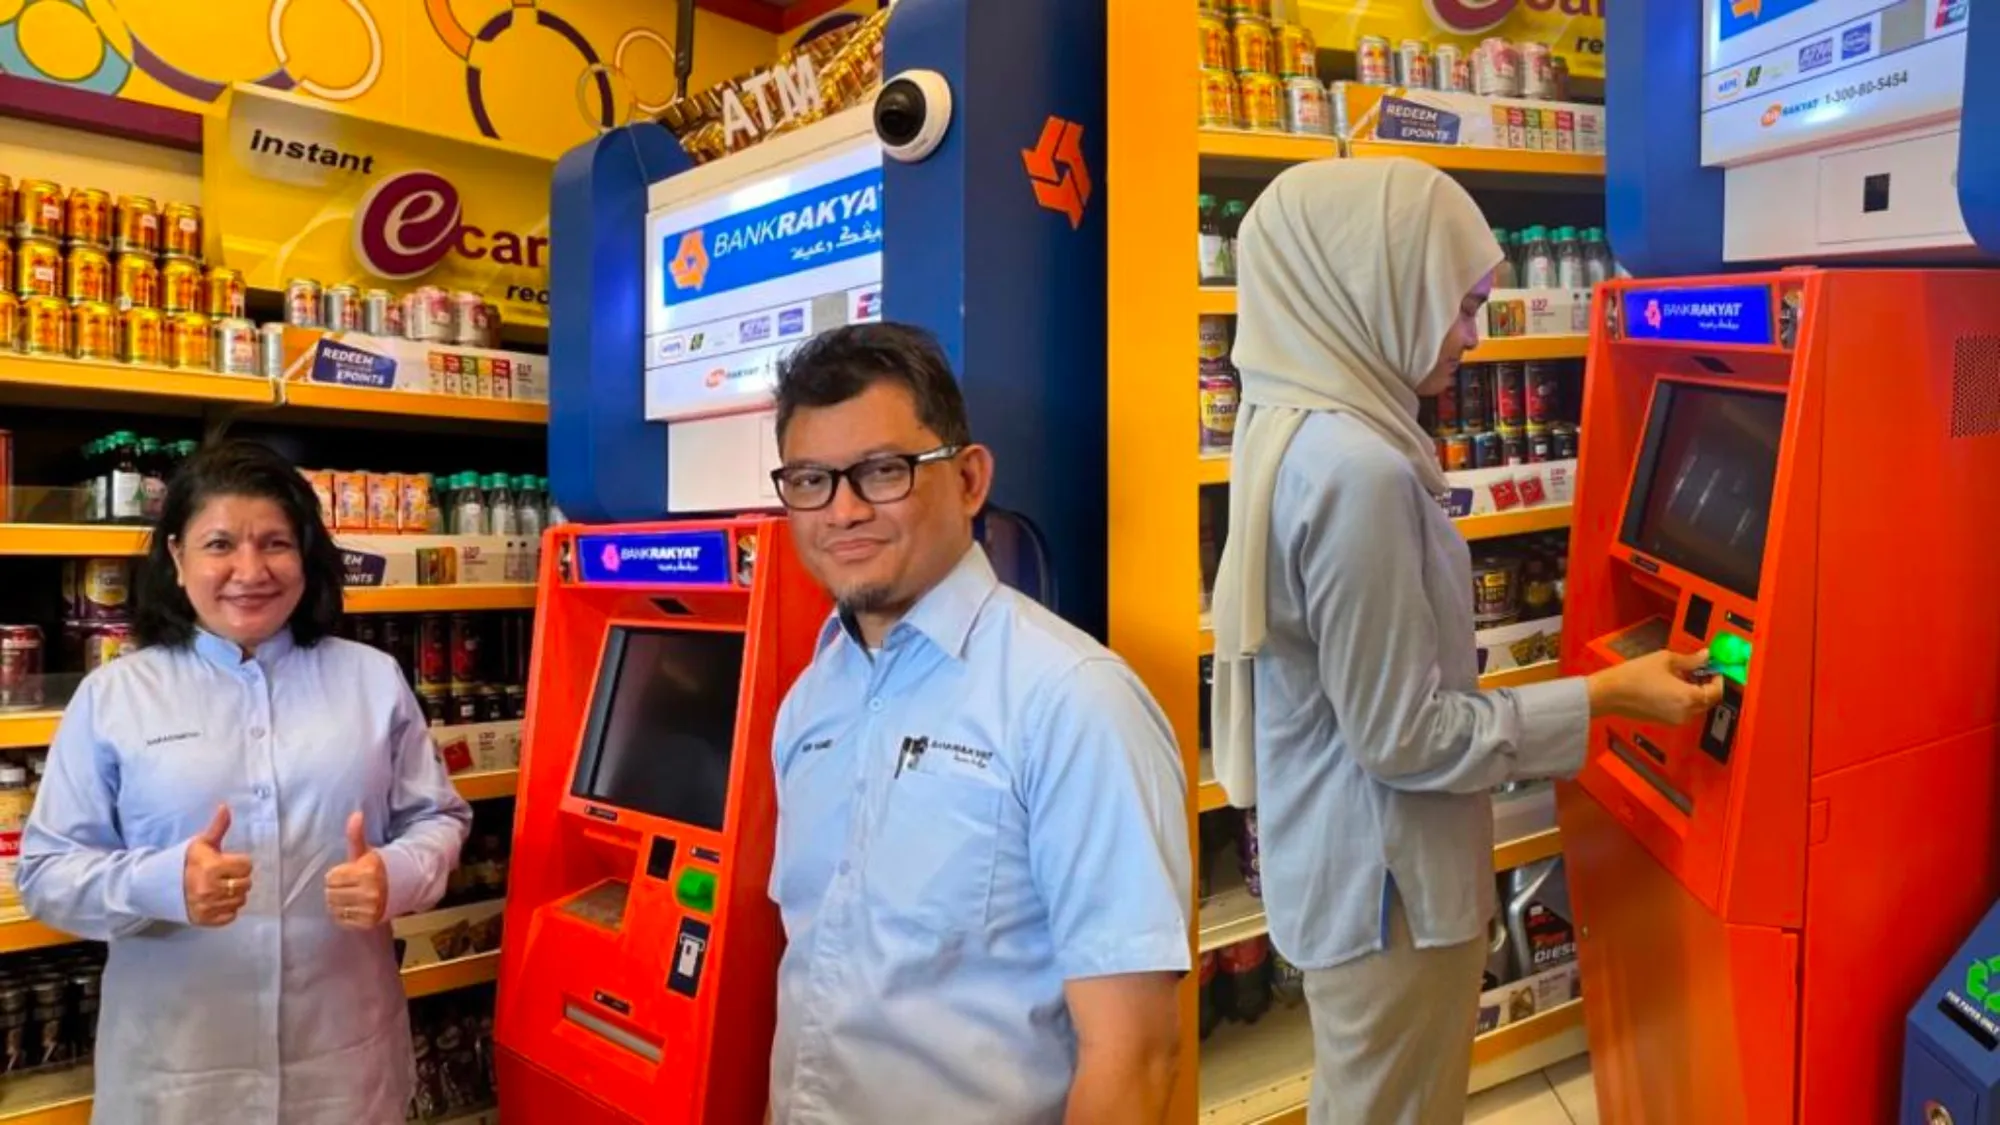 how to change the bank rakyat transaction limit at atm online